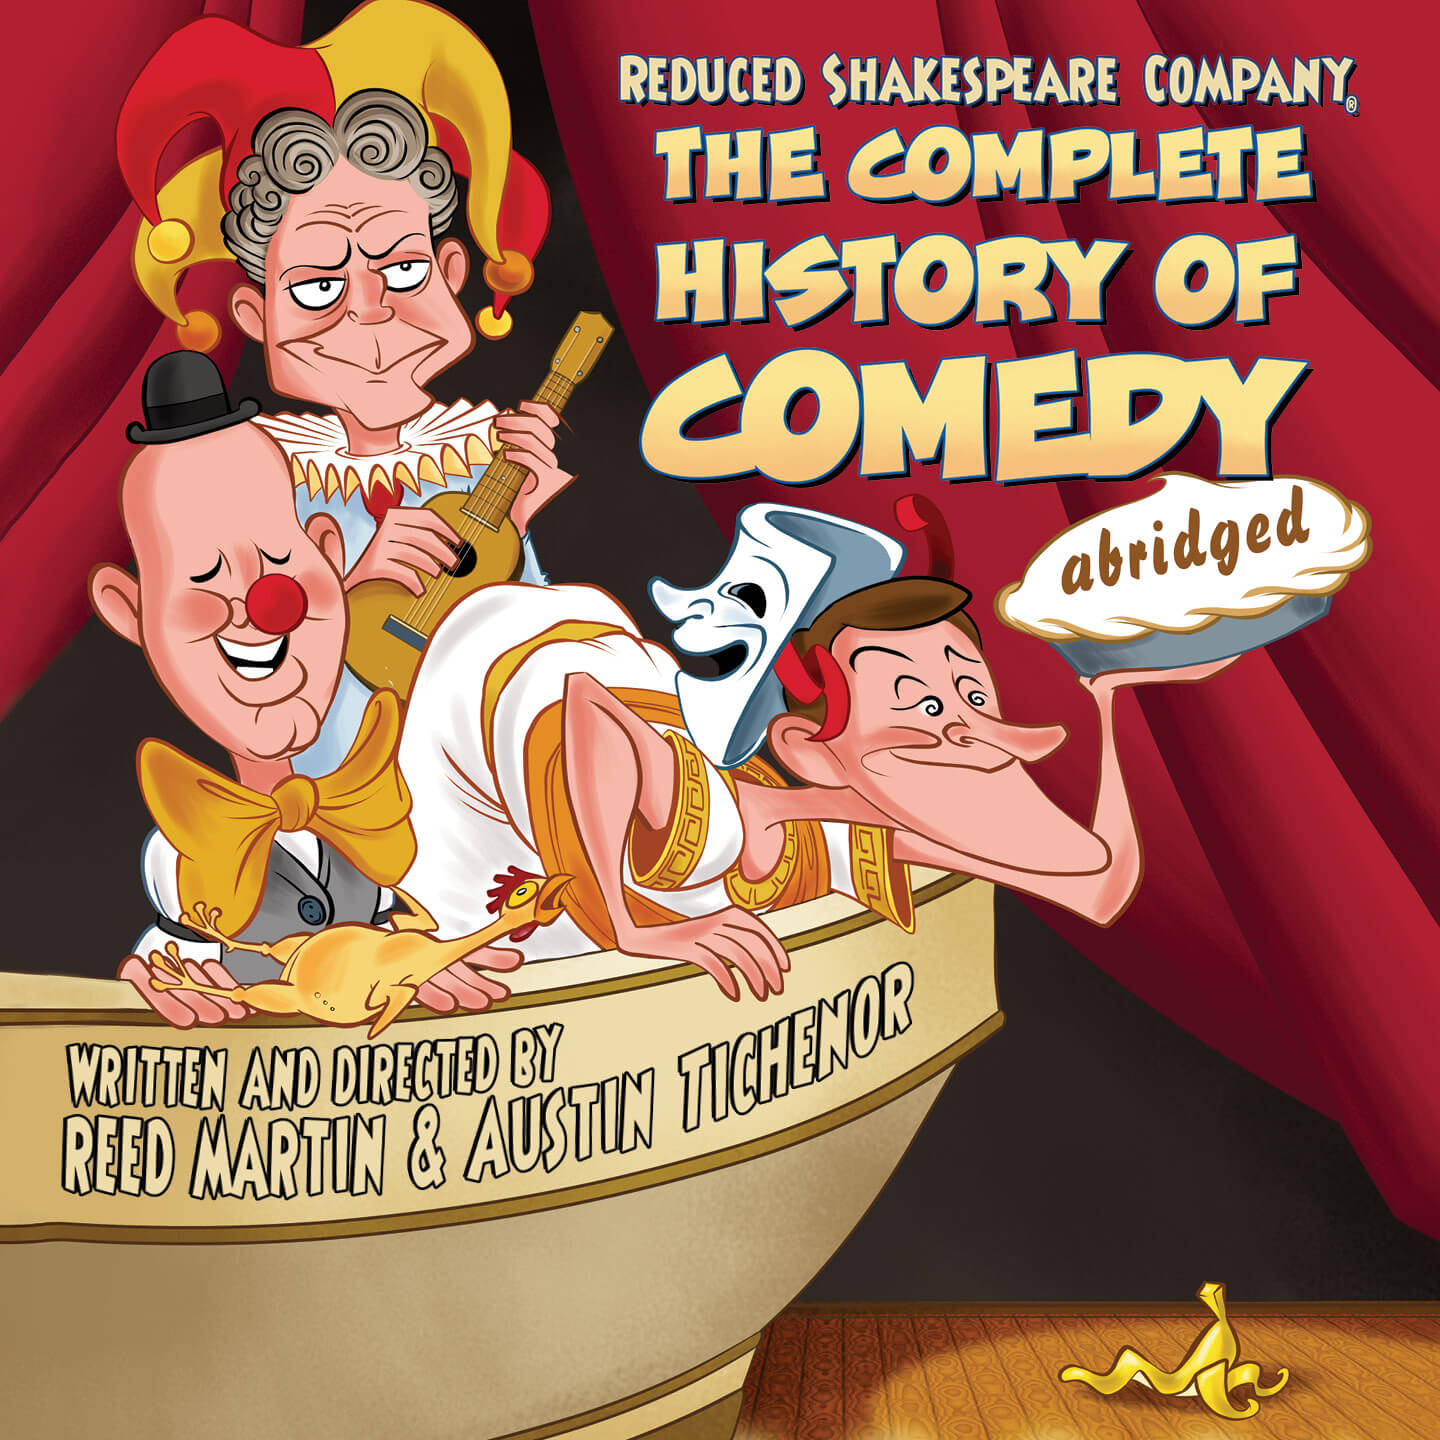 Reduced Shakespeare Company: The Complete History of Comedy (Abridged)